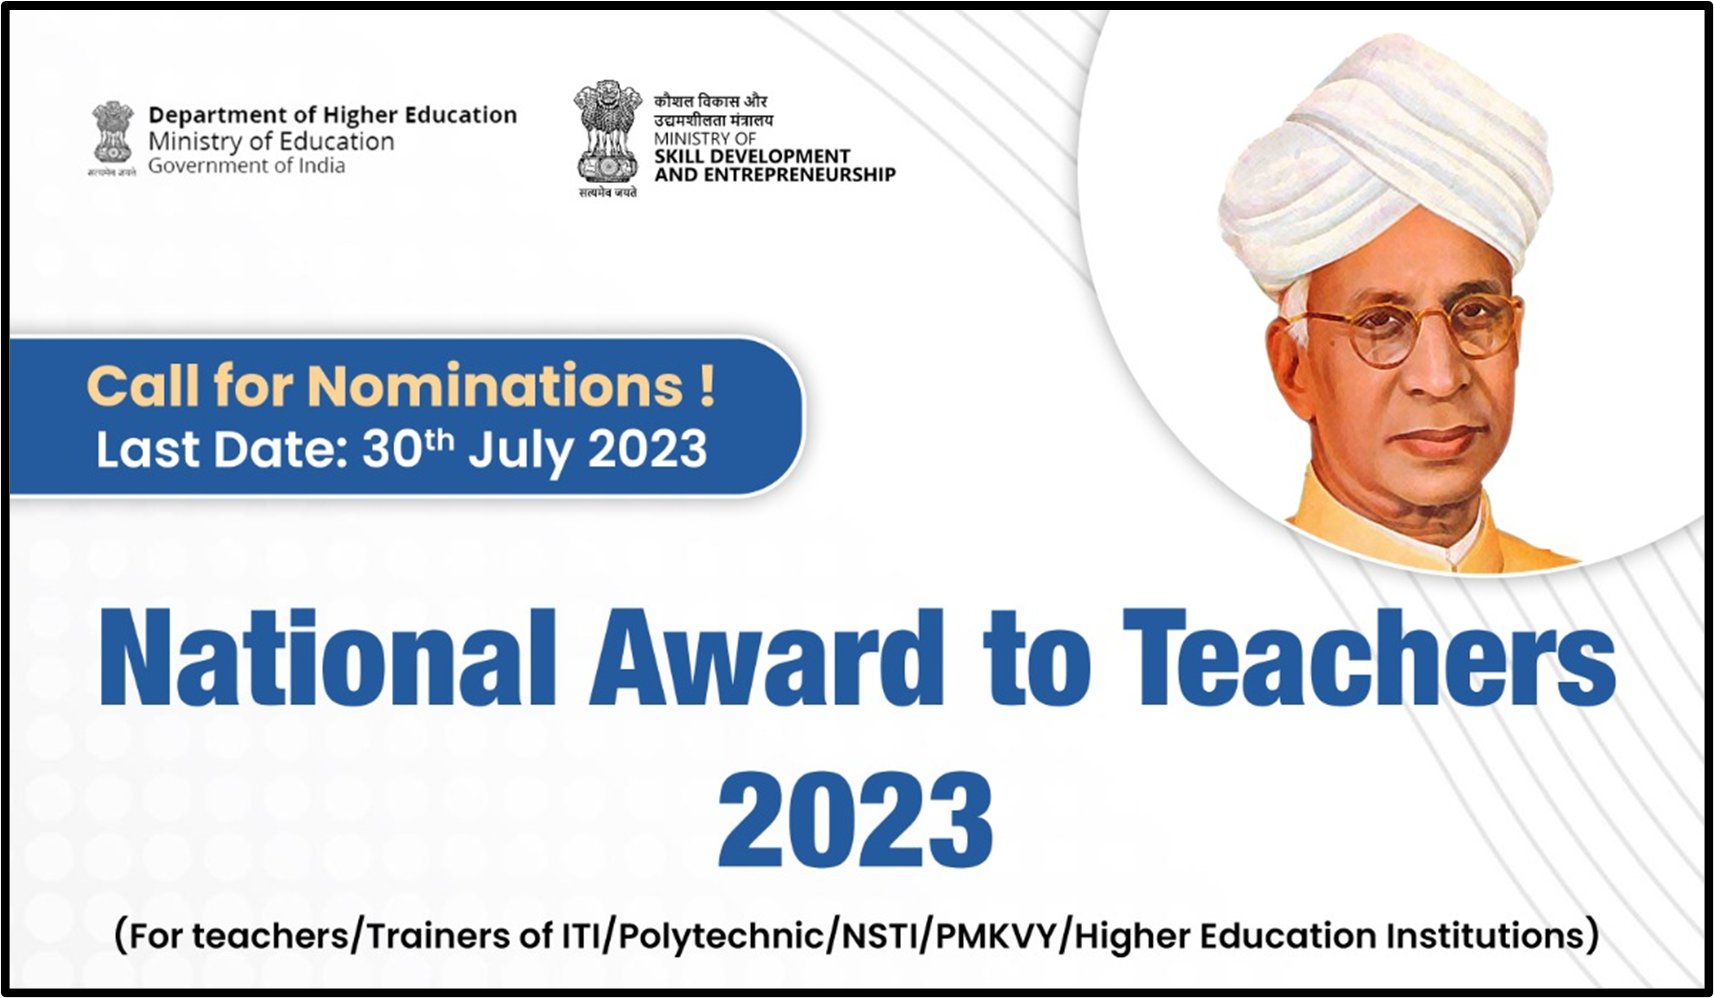 National Award to Teachers 2023 Nominations for Higher Education Institutions